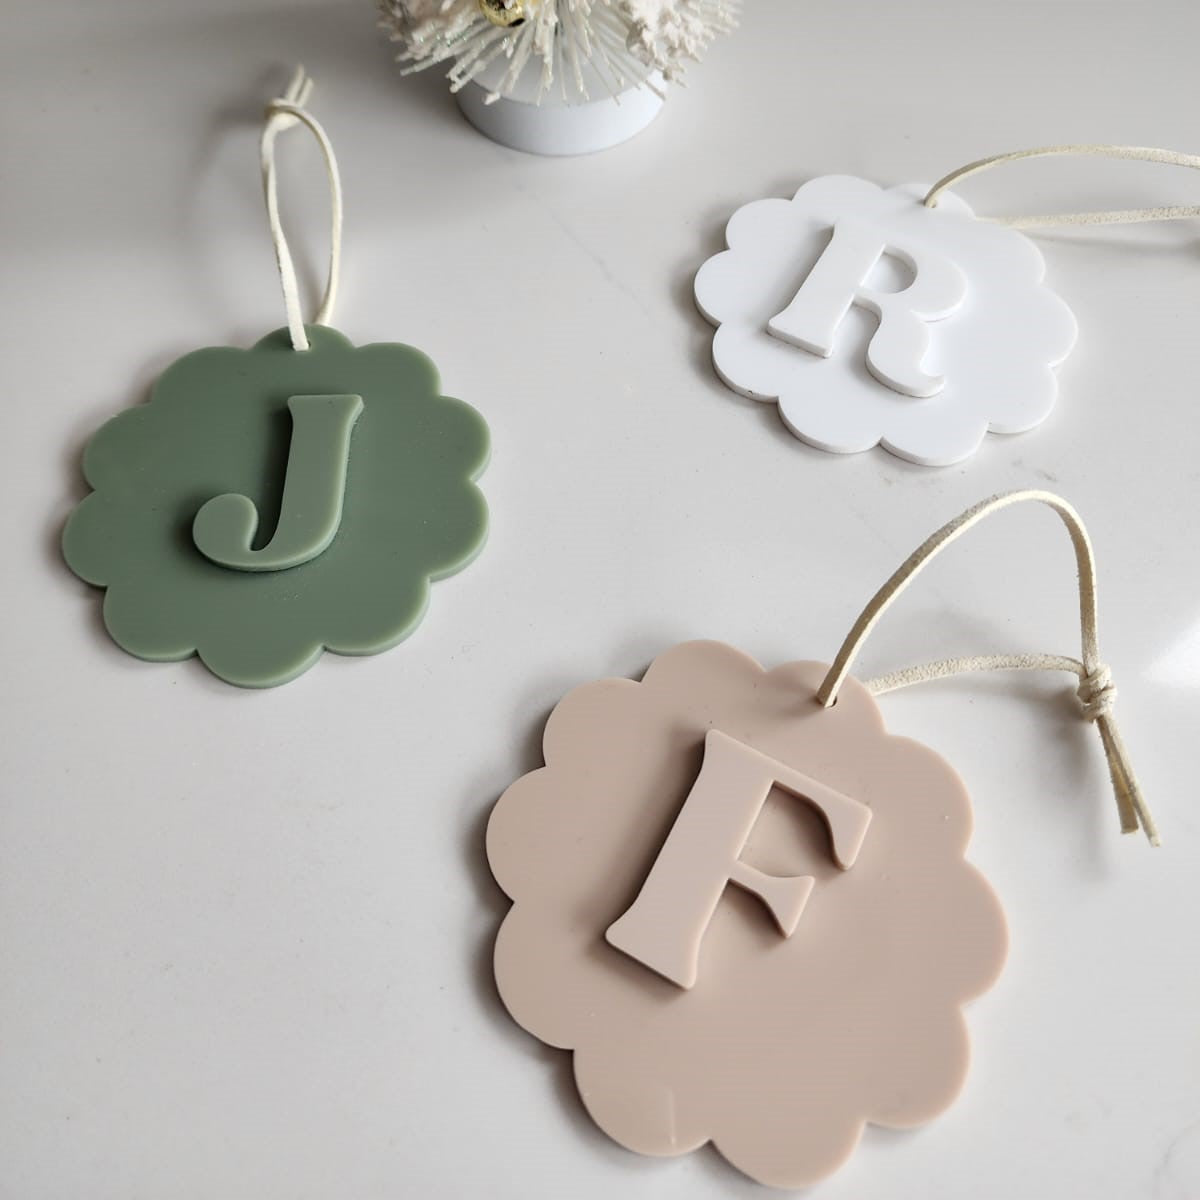 Letter Tree or Gift Ornaments